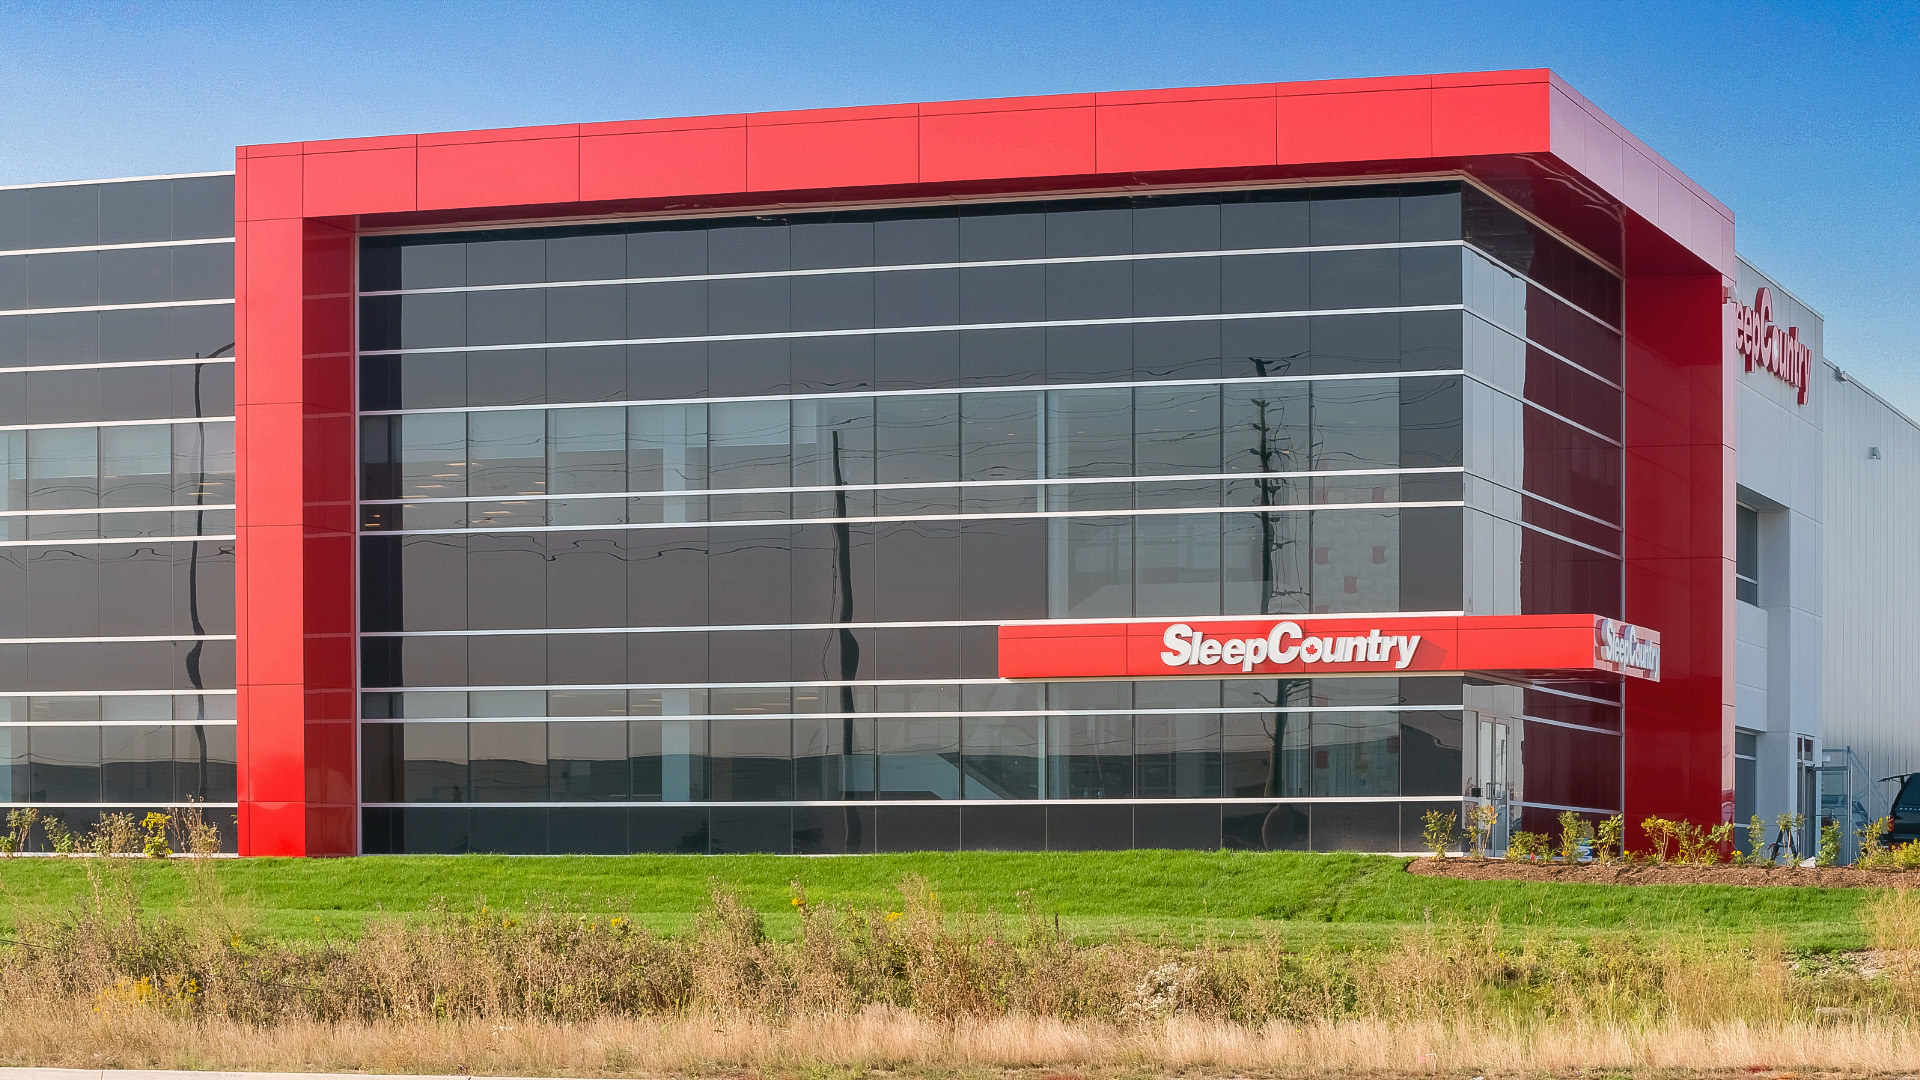 Sleep Country achieves significant results in 4-store pilot preceding portfolio-wide rollout